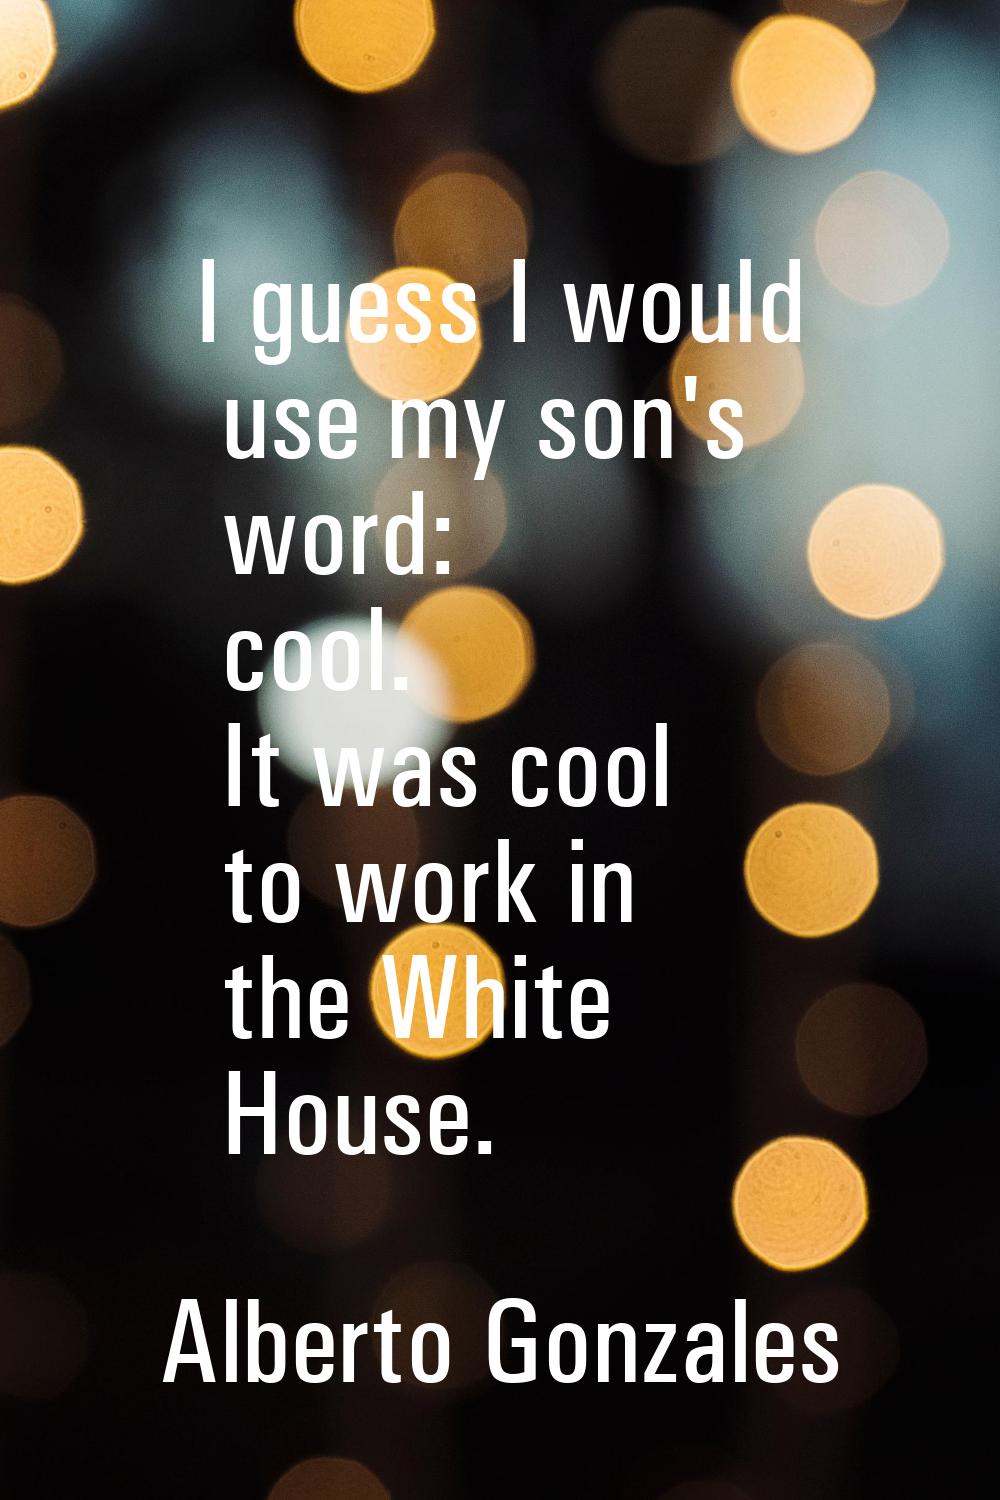 I guess I would use my son's word: cool. It was cool to work in the White House.